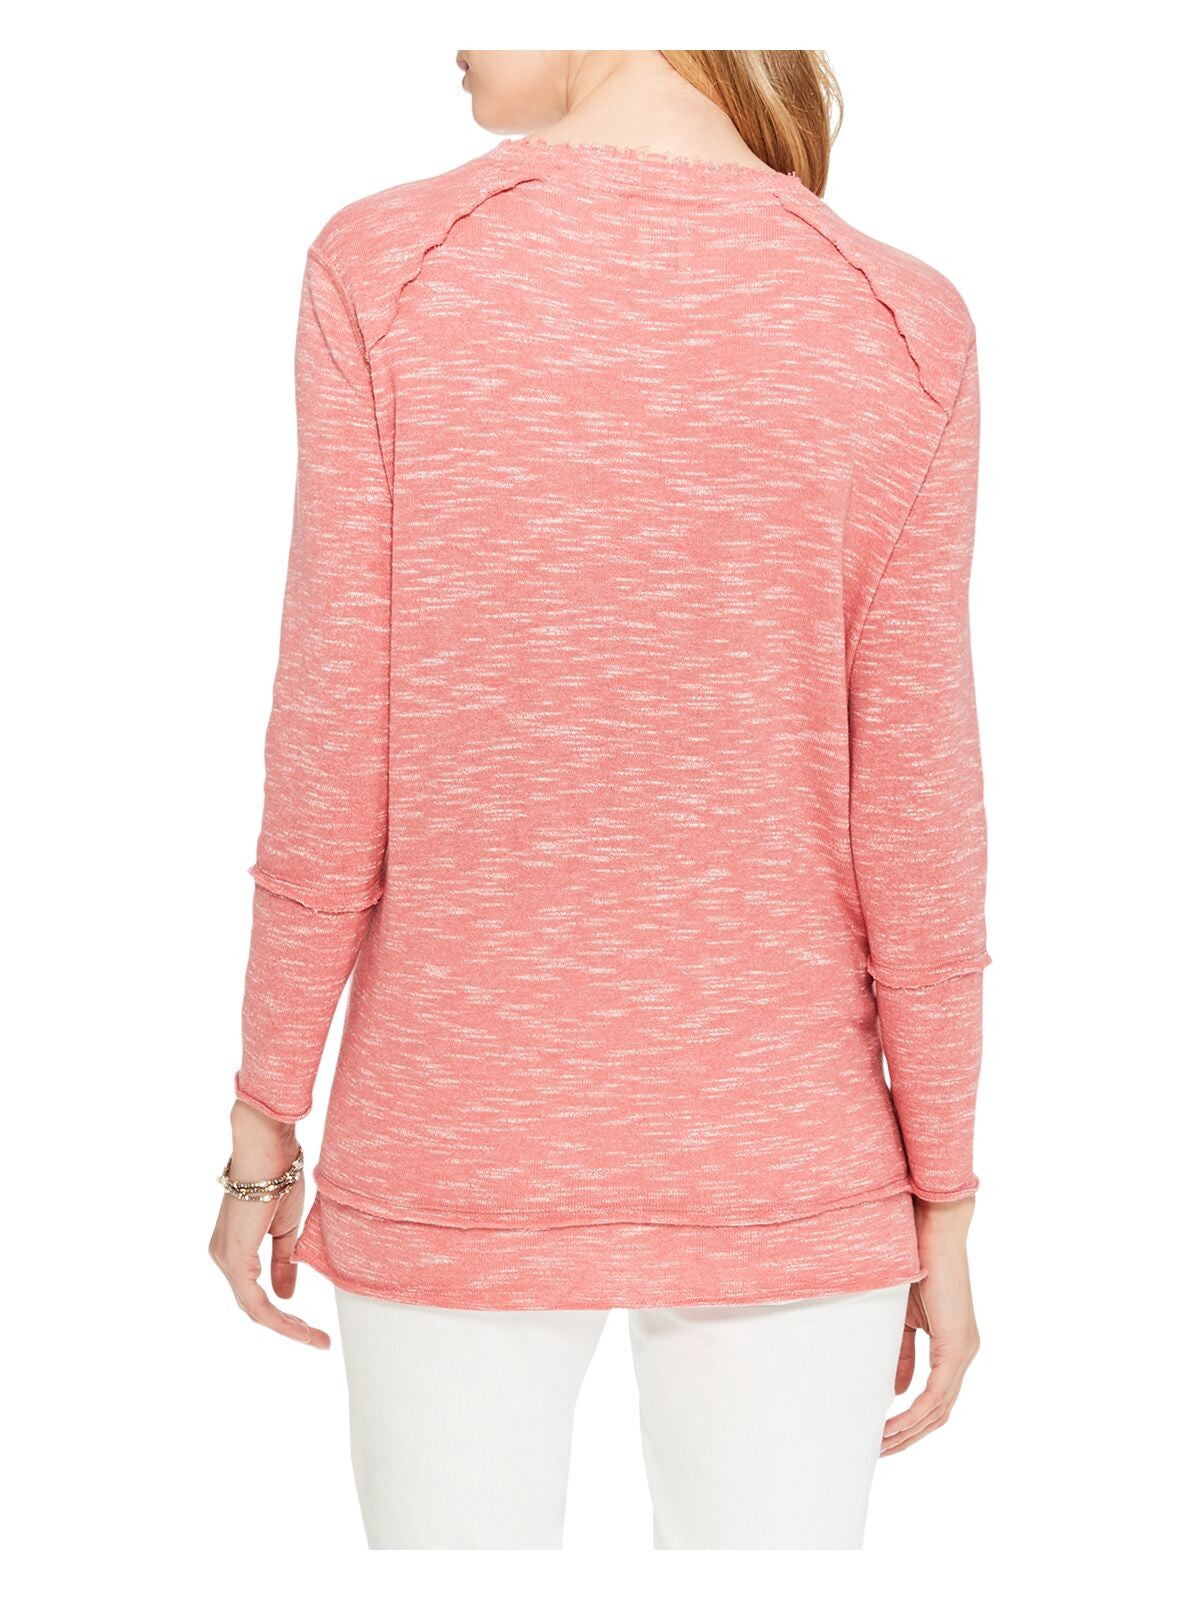 NIC+ZOE Womens Pink Ribbed Distressed Raw Trim Heather Long Sleeve V Neck Hi-Lo Sweater S